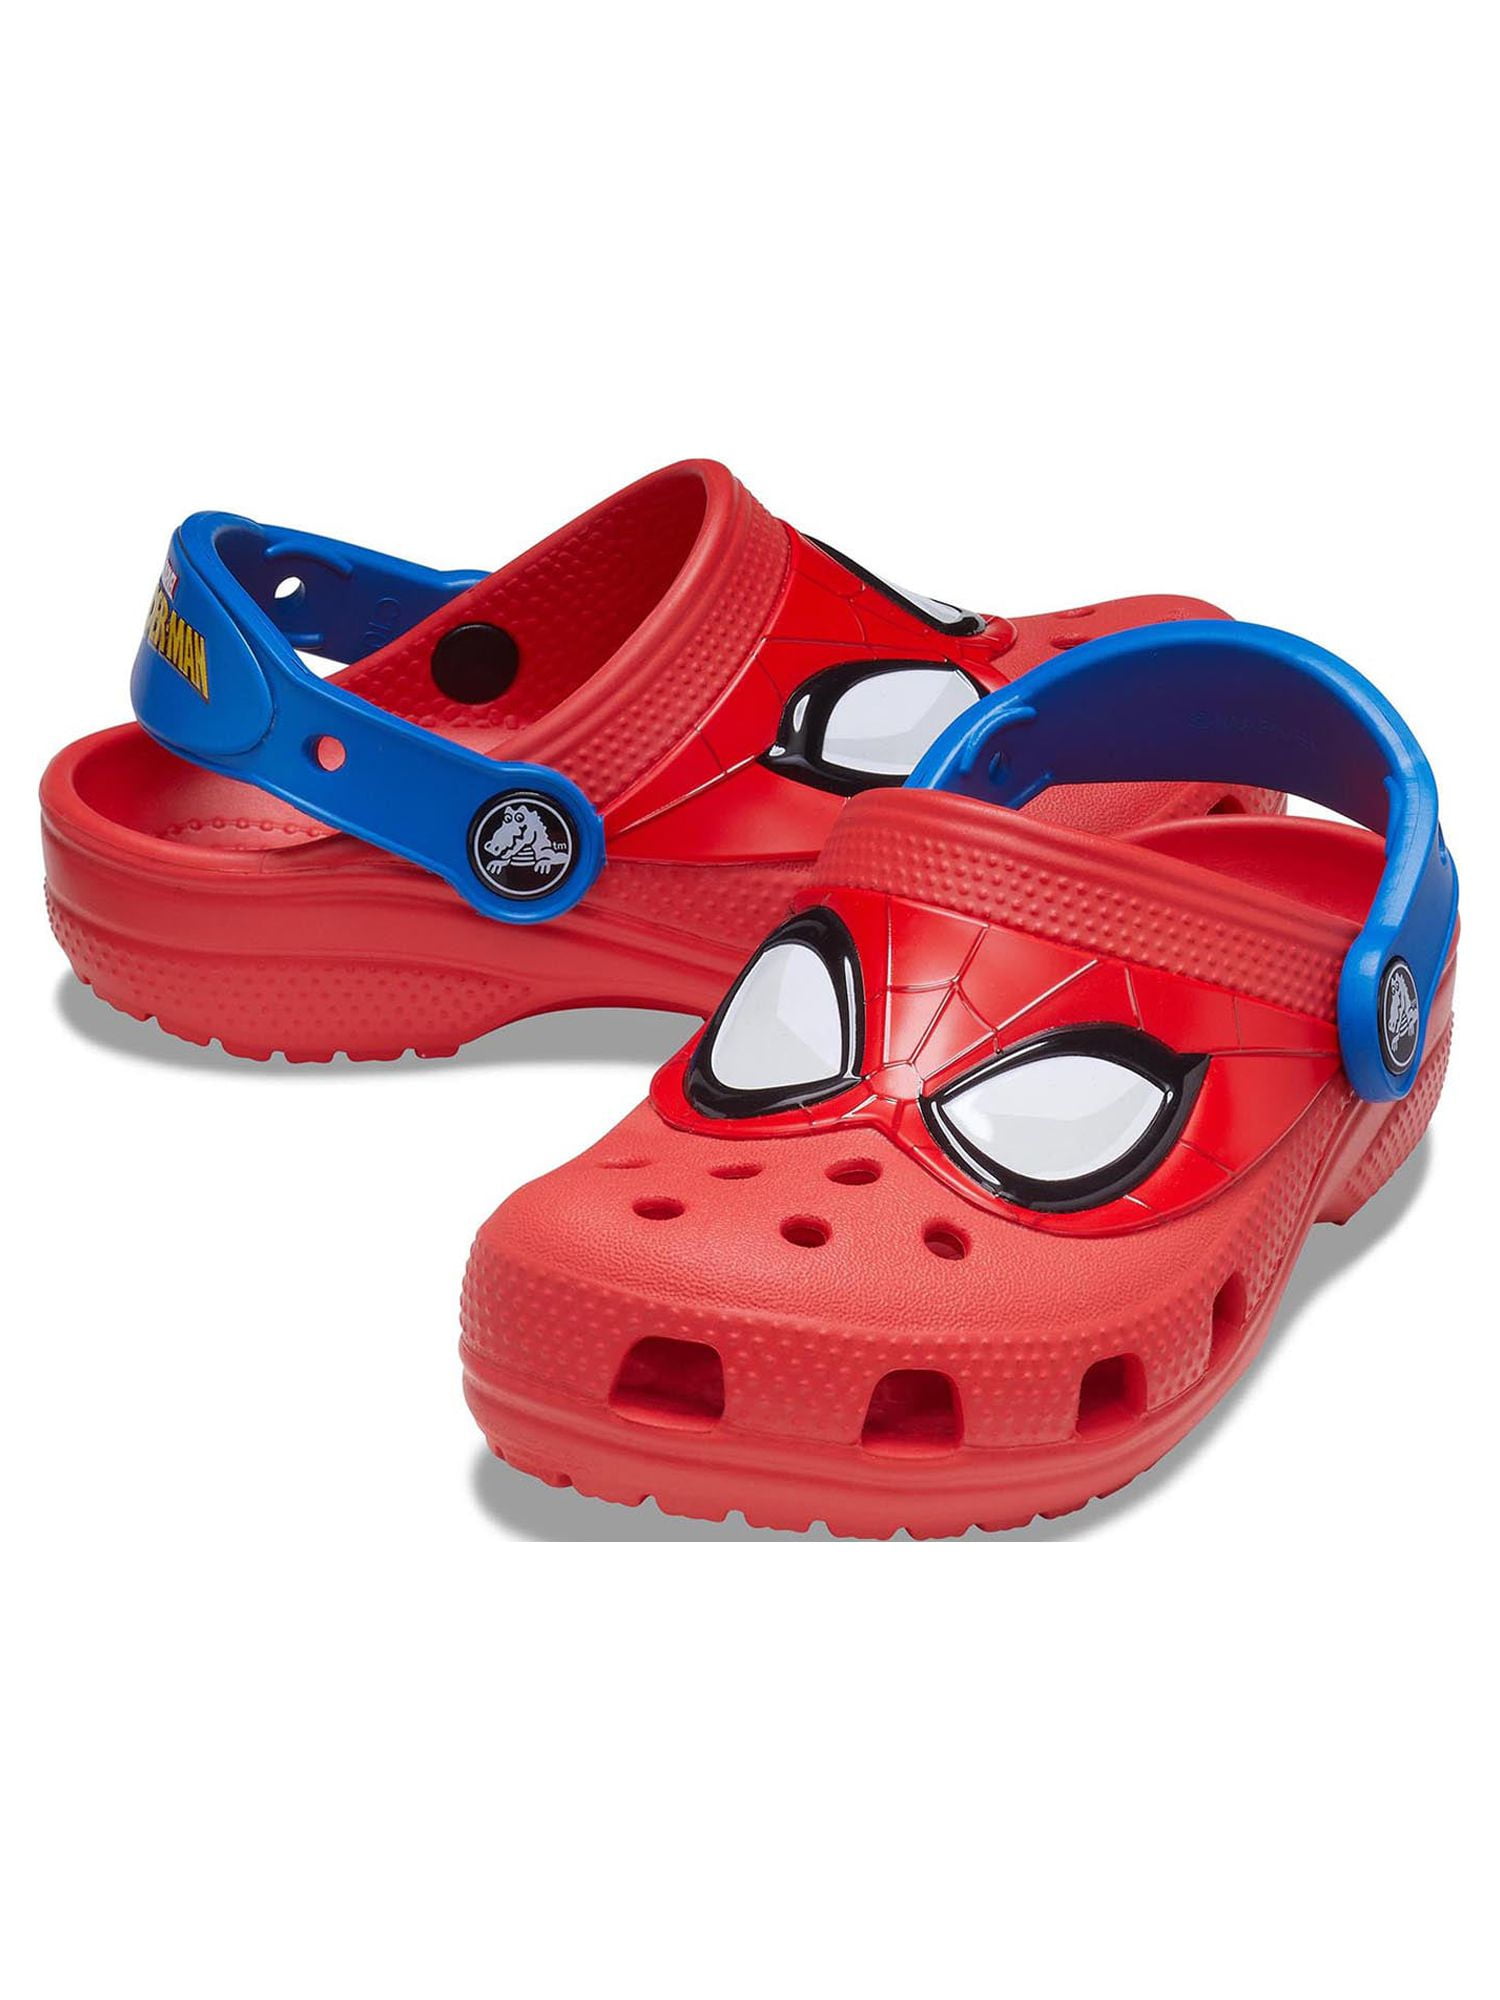 how cute are these new spiderman crocs!? 😭😍🕷️ #spiderman